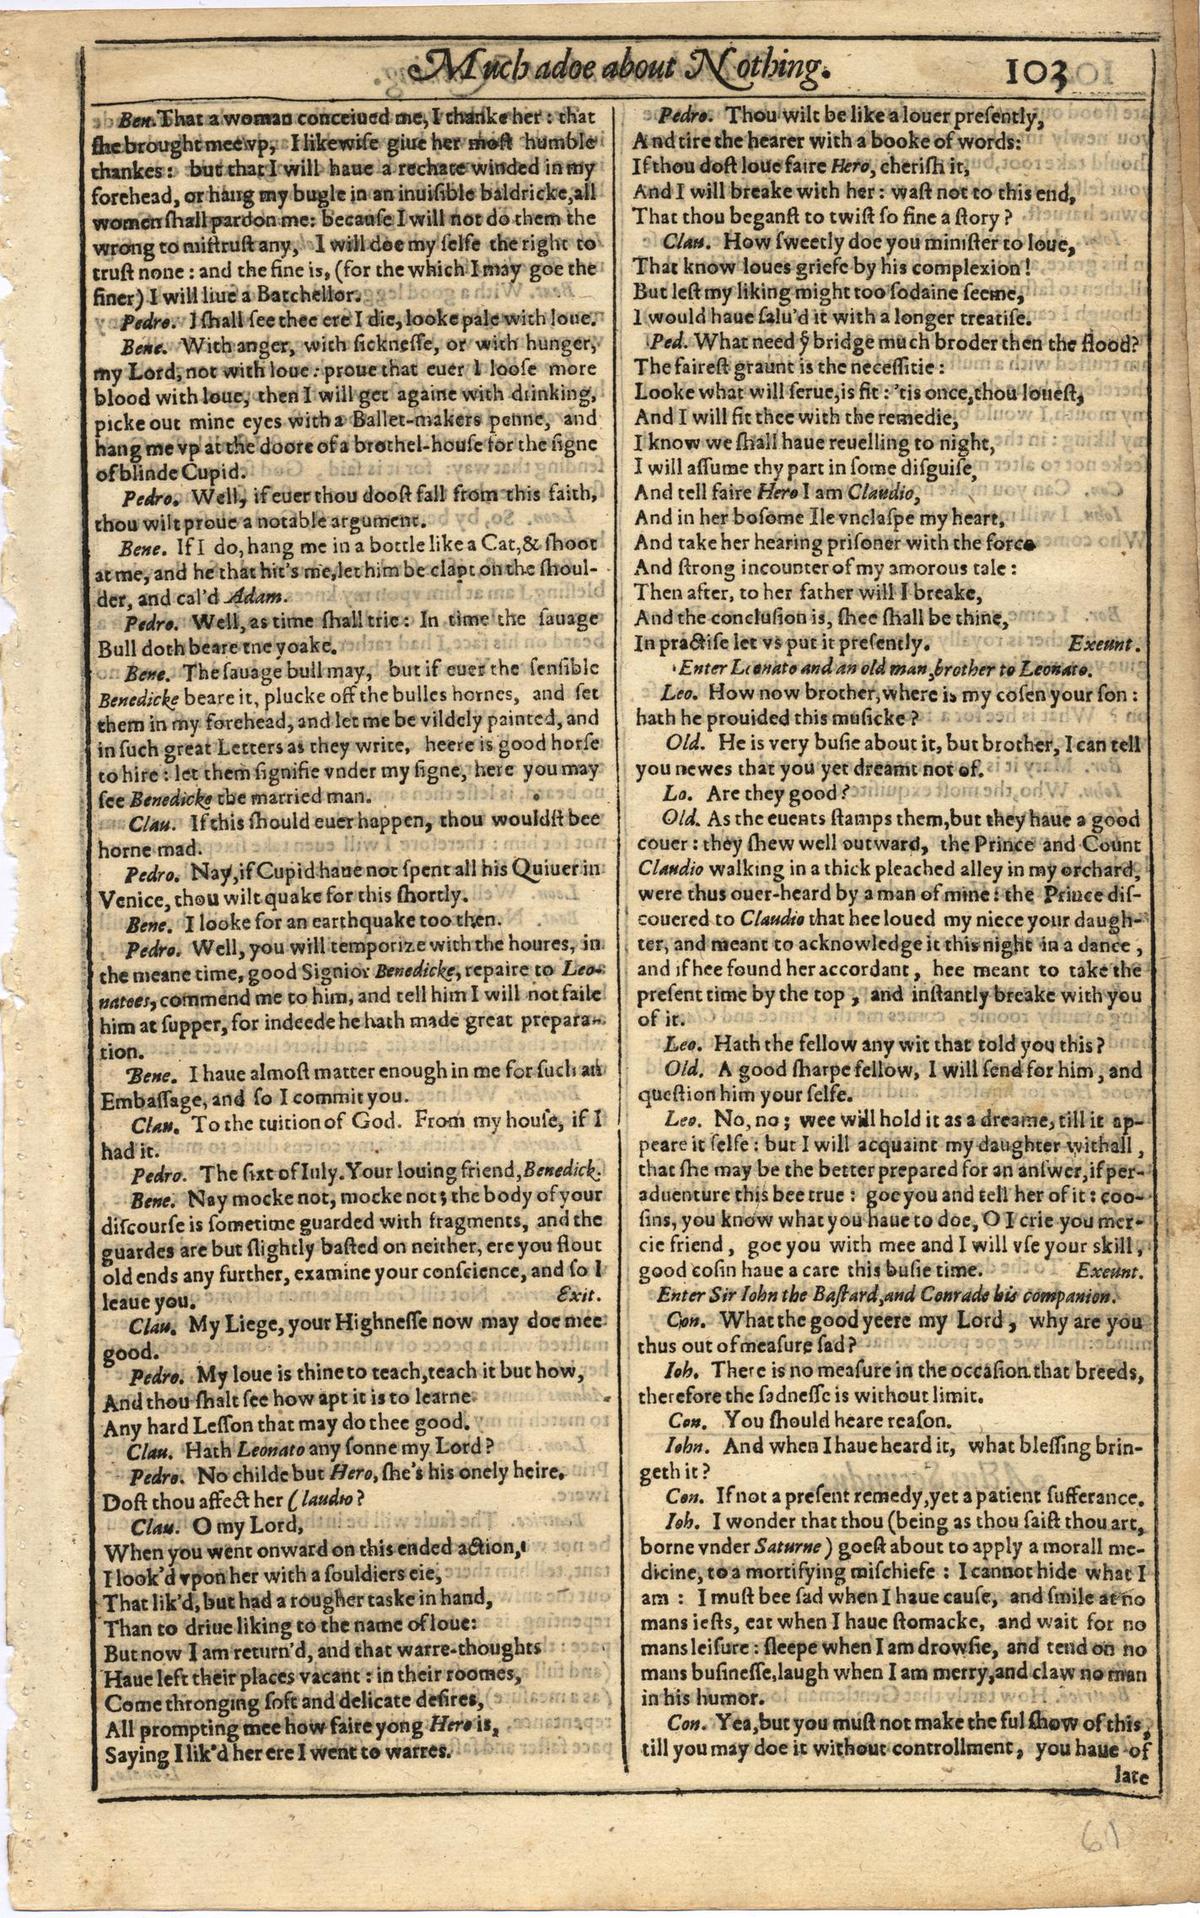 Image of page 121